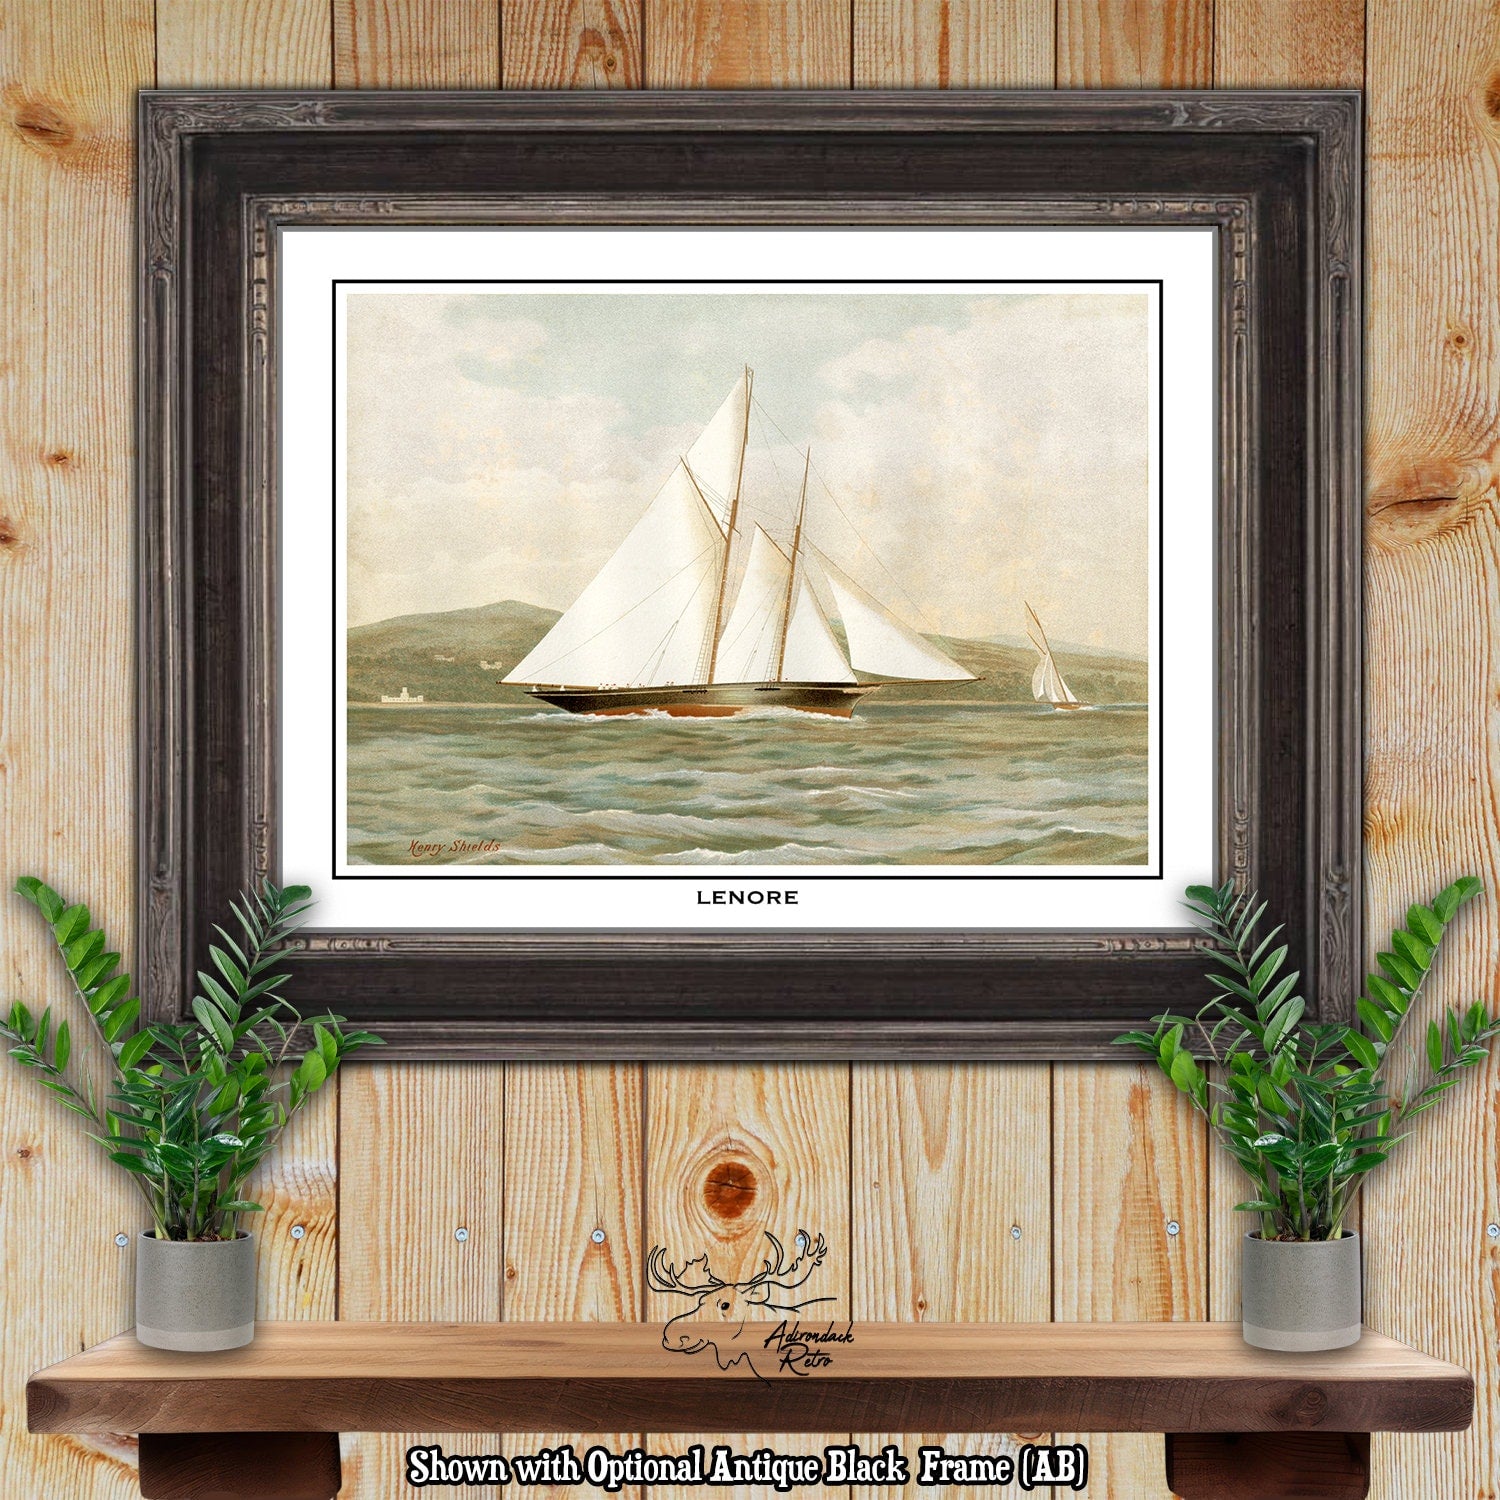 Clyde Yacht Lenore by Henry Shields Giclee Fine Art Print at Adirondack Retro